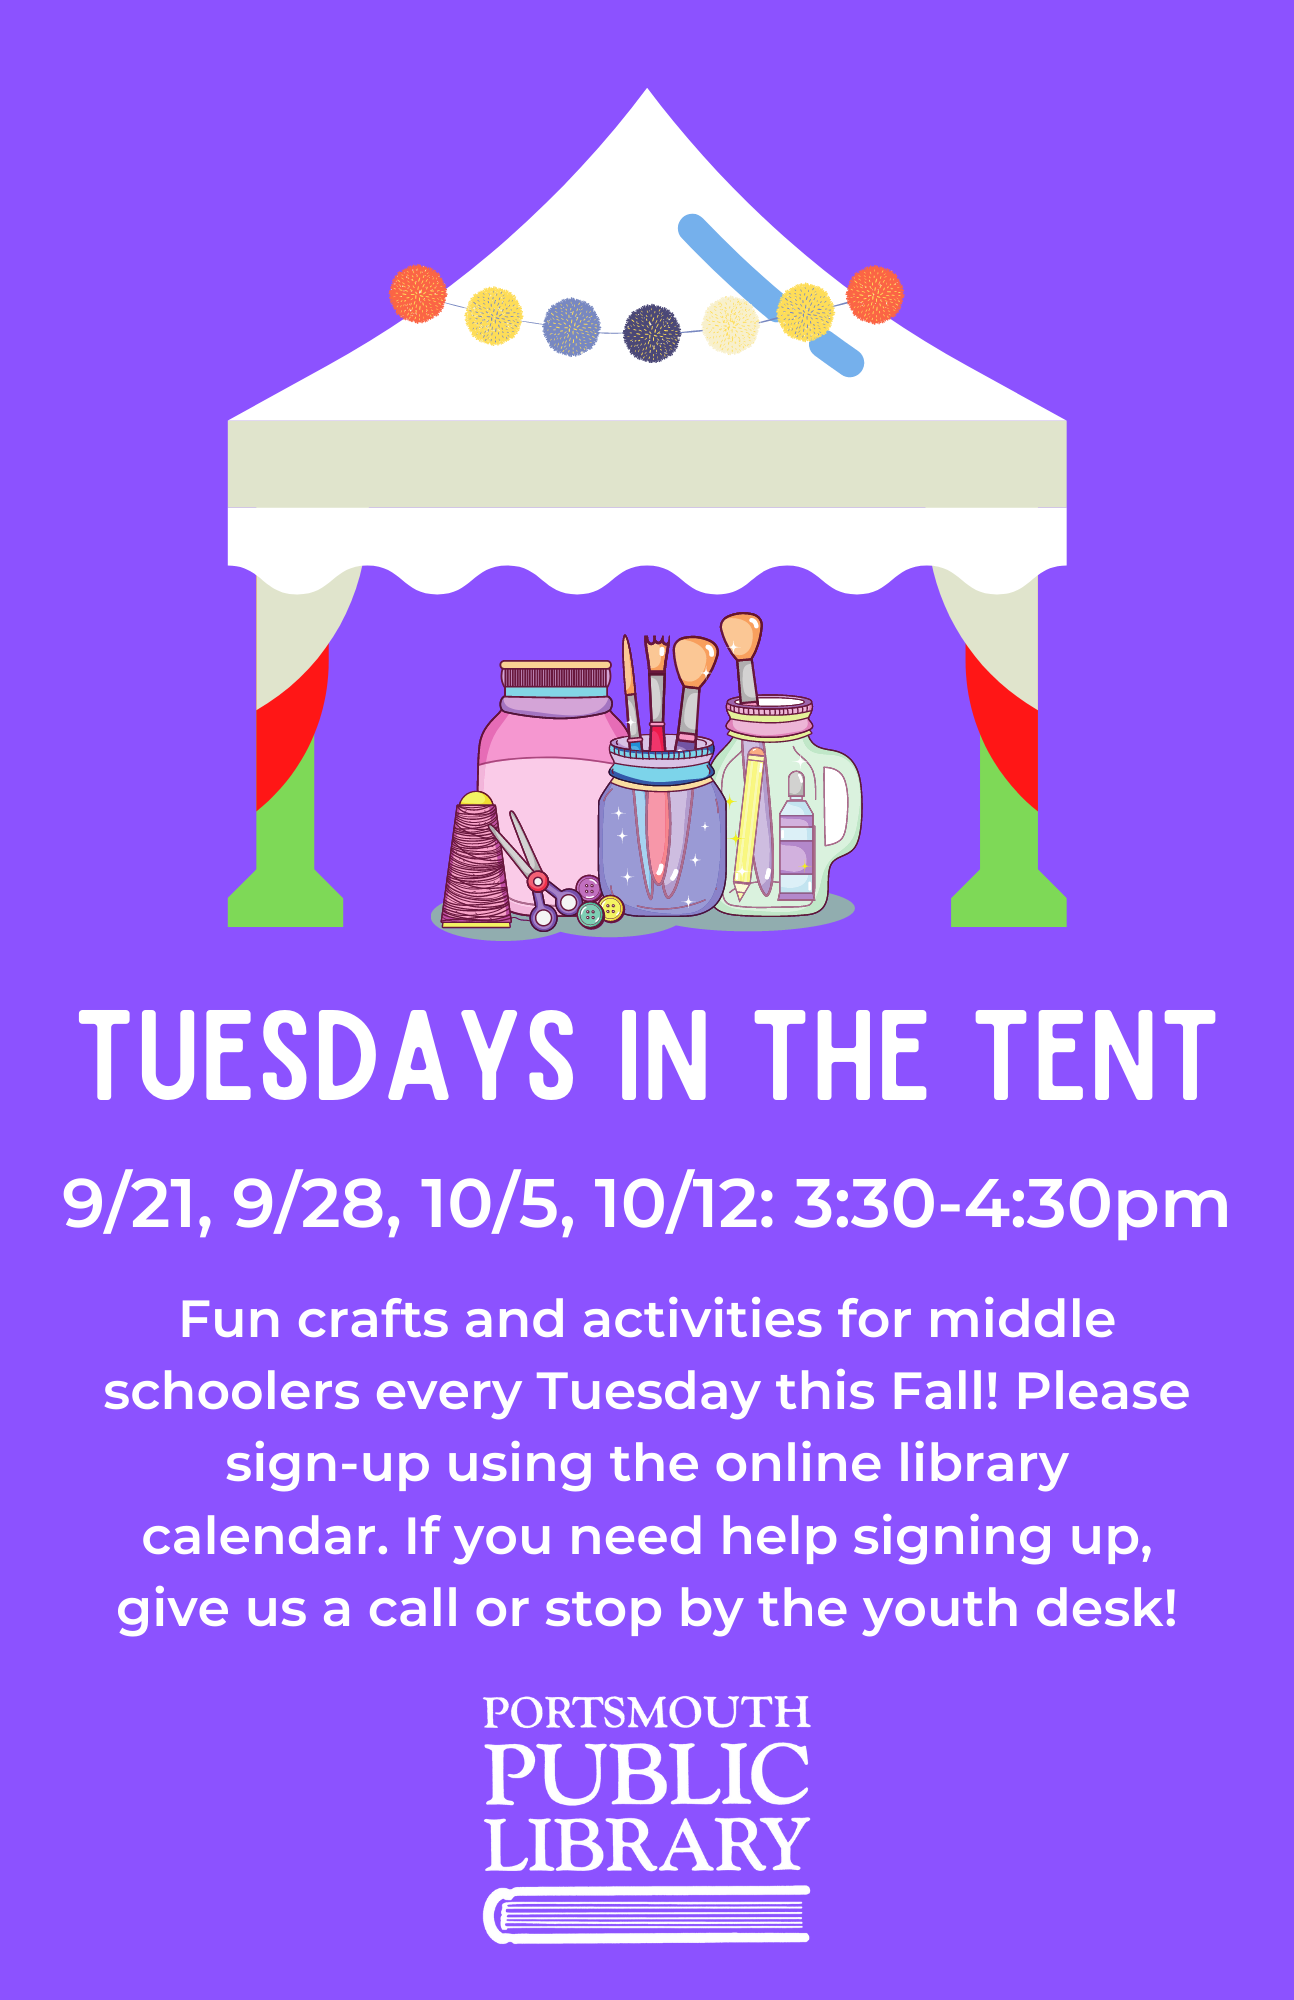 Tuesdays in the Tent flyer